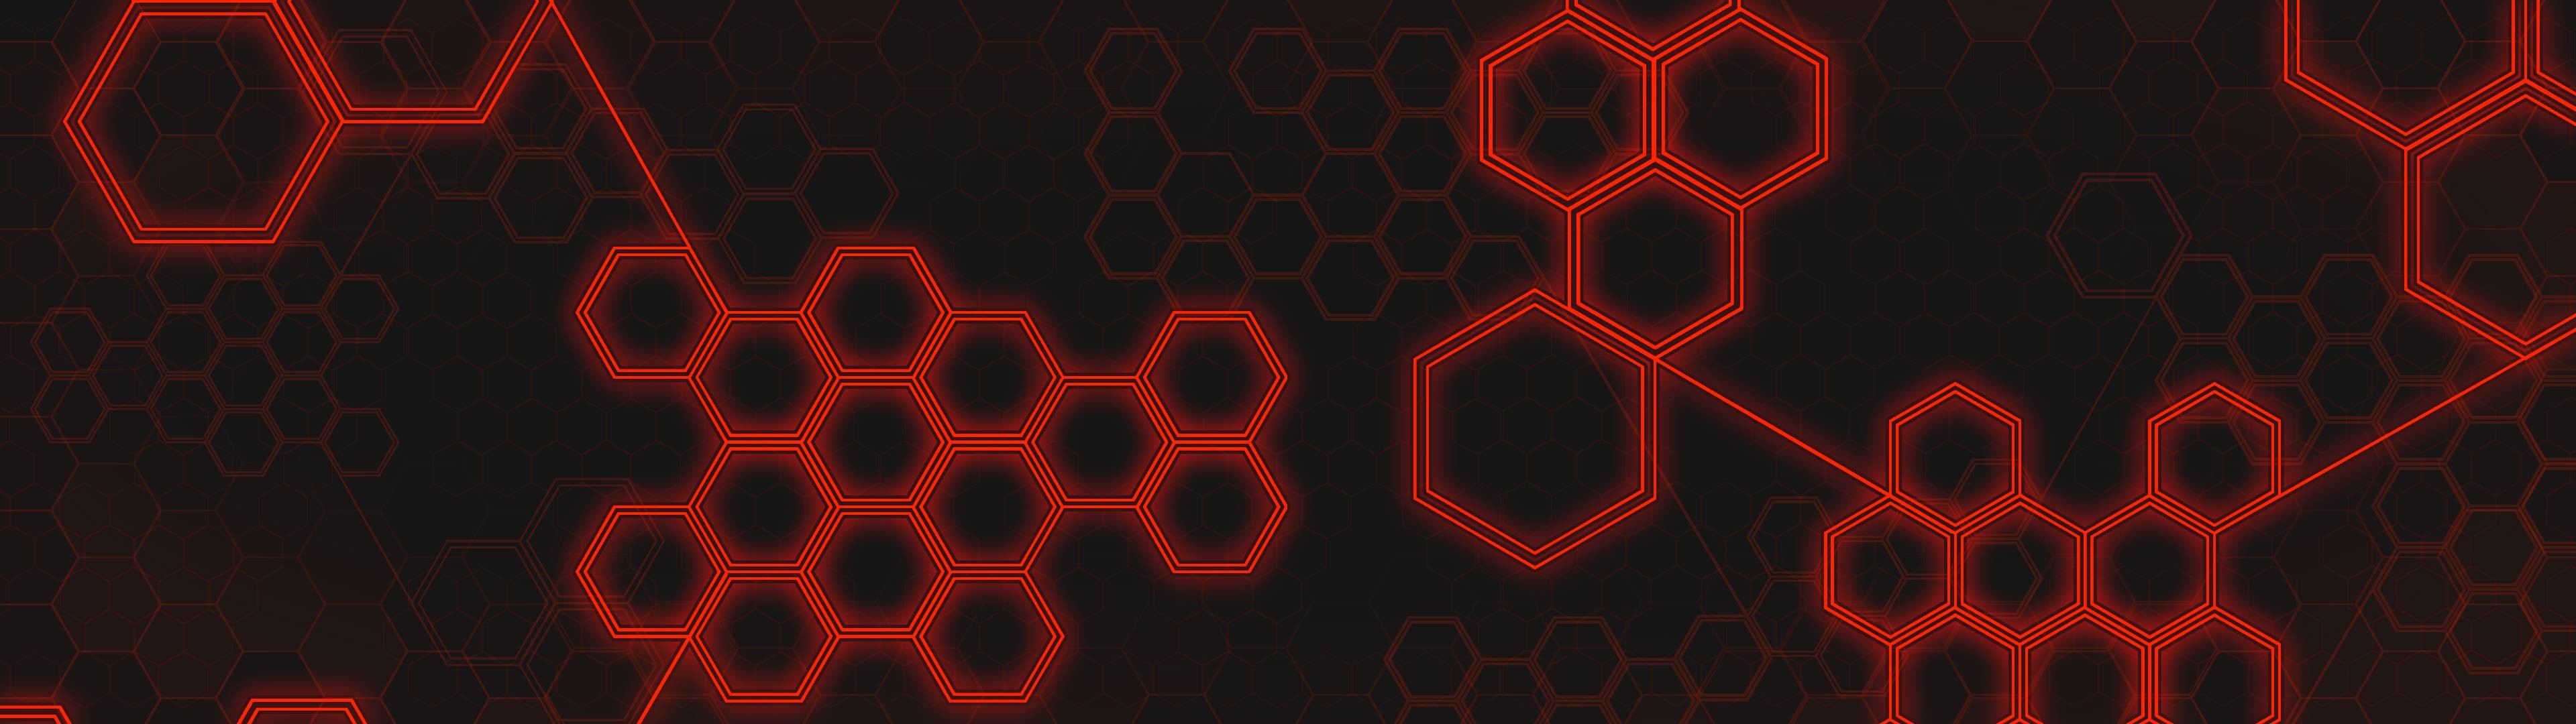 3840x1080 Red Hexagons. Made by me for two screens.